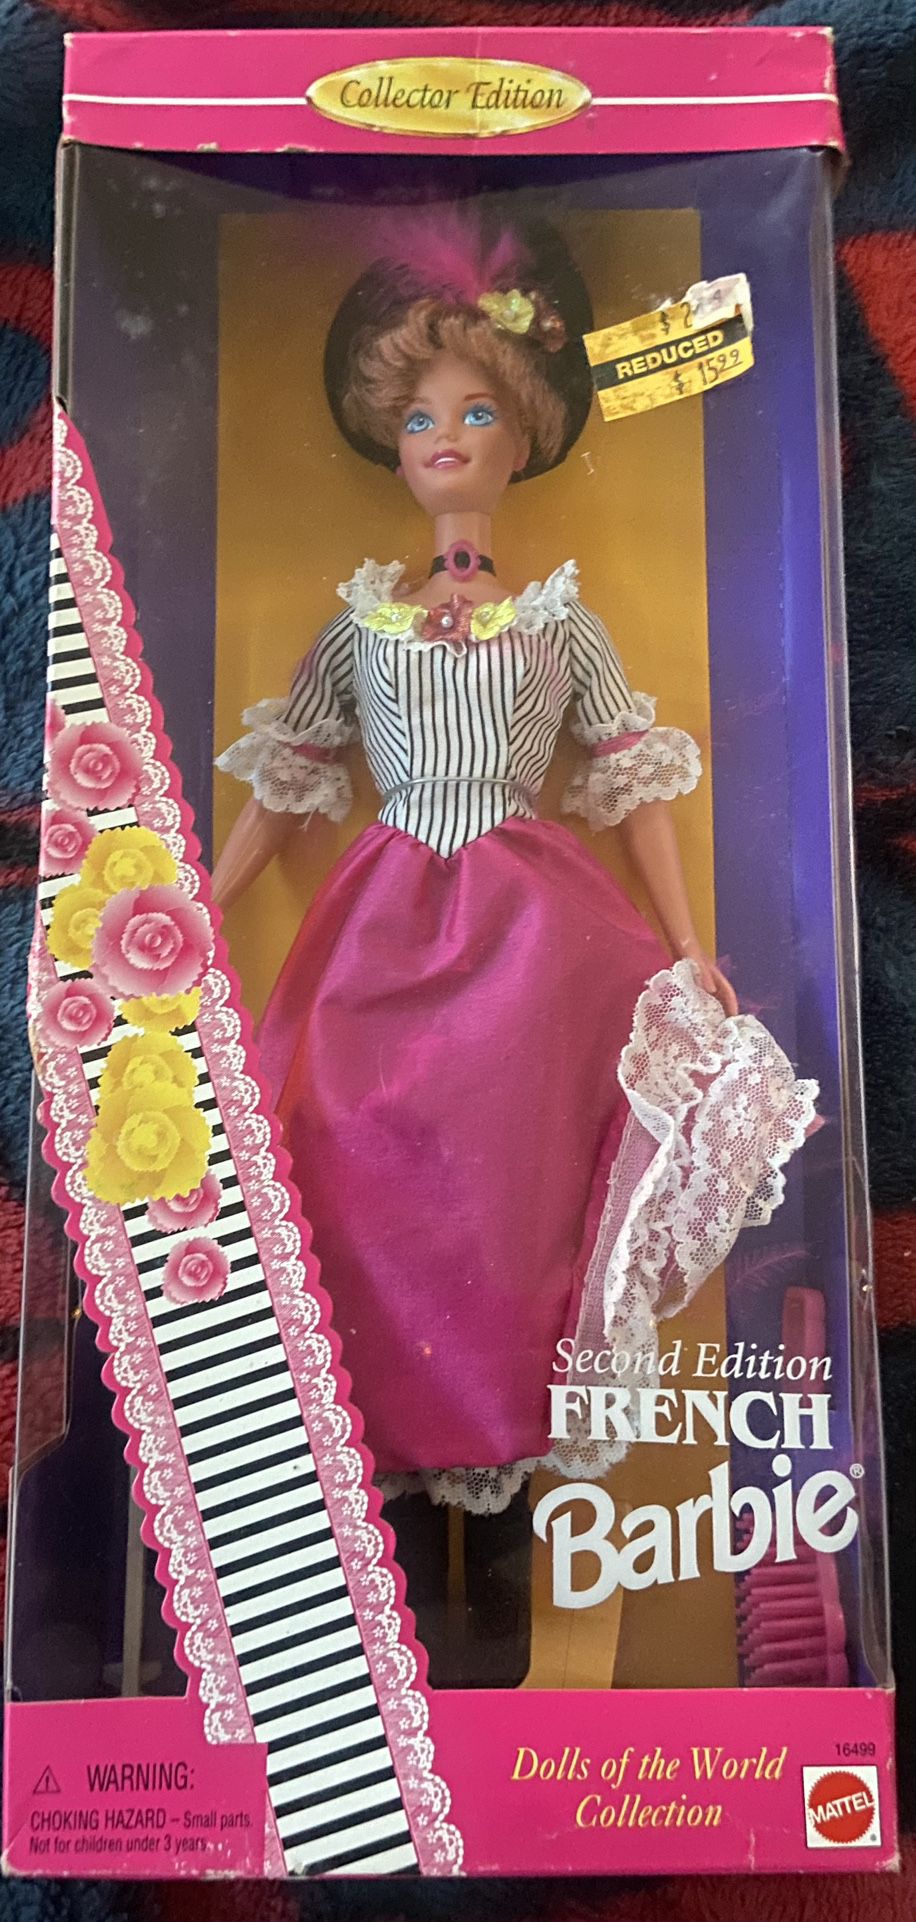 Second edition french barbie collector edition